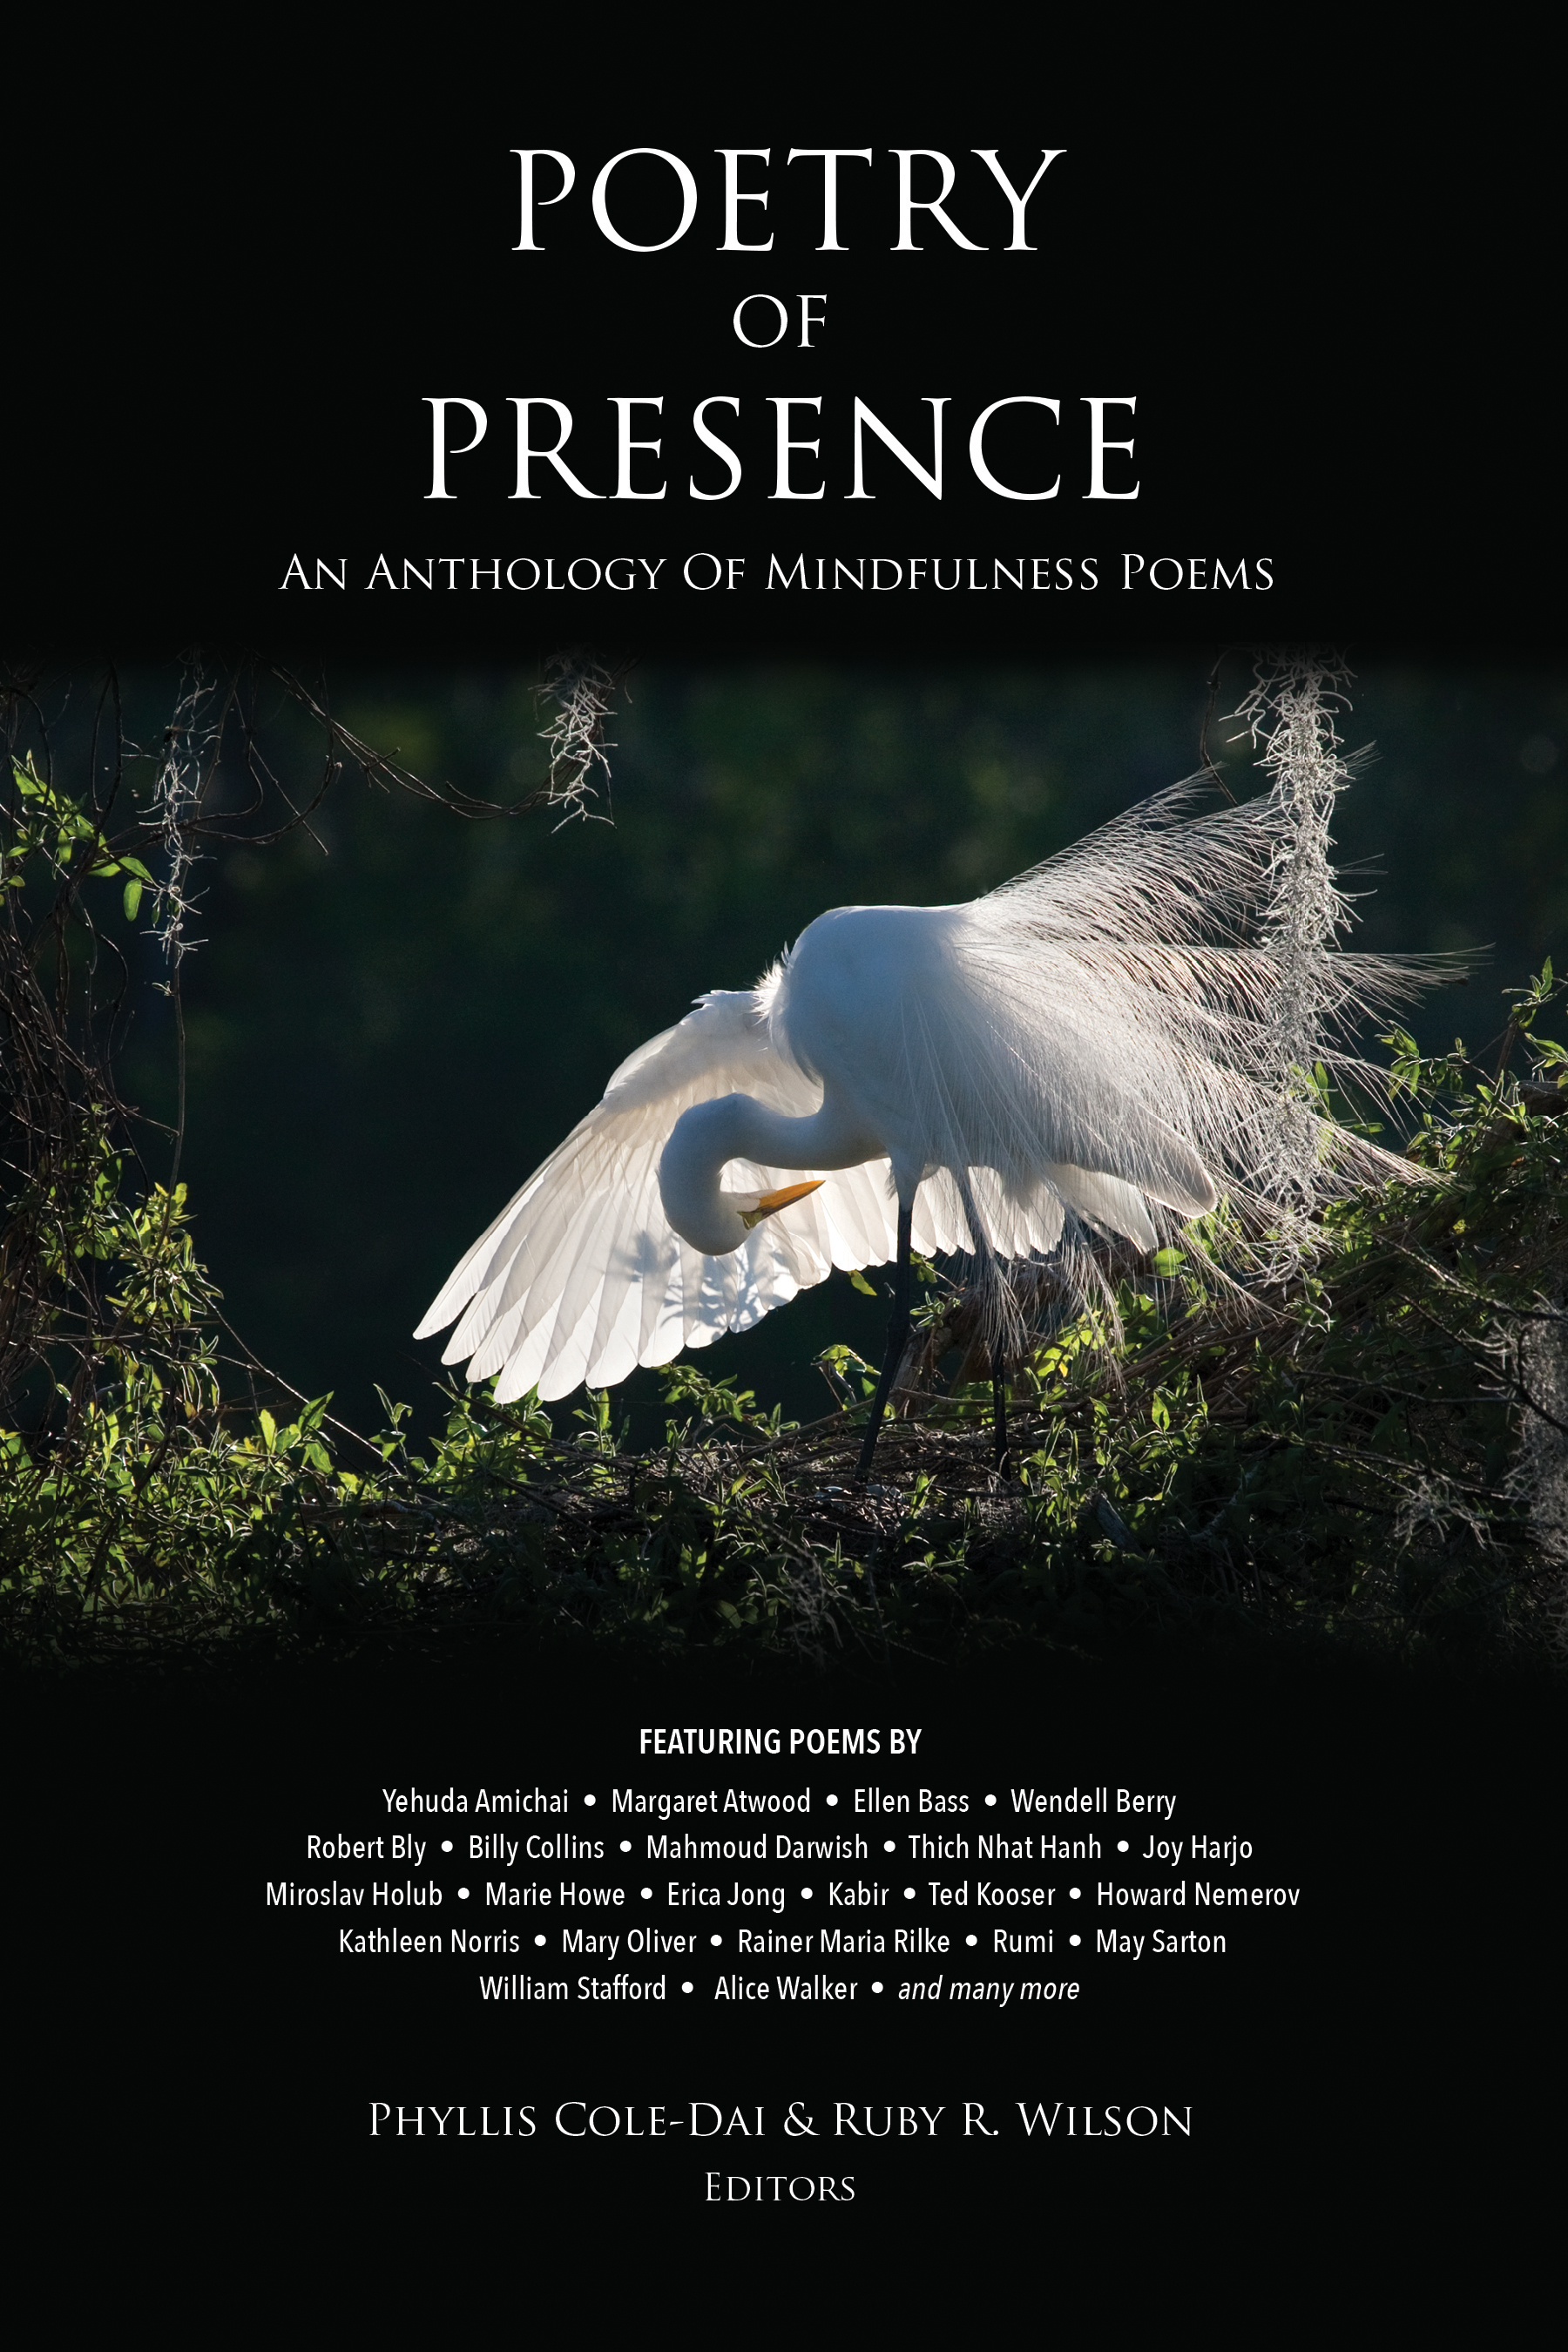 Poetry of Presence-book-cover-beautiful-egret-photo by David Moynahan.